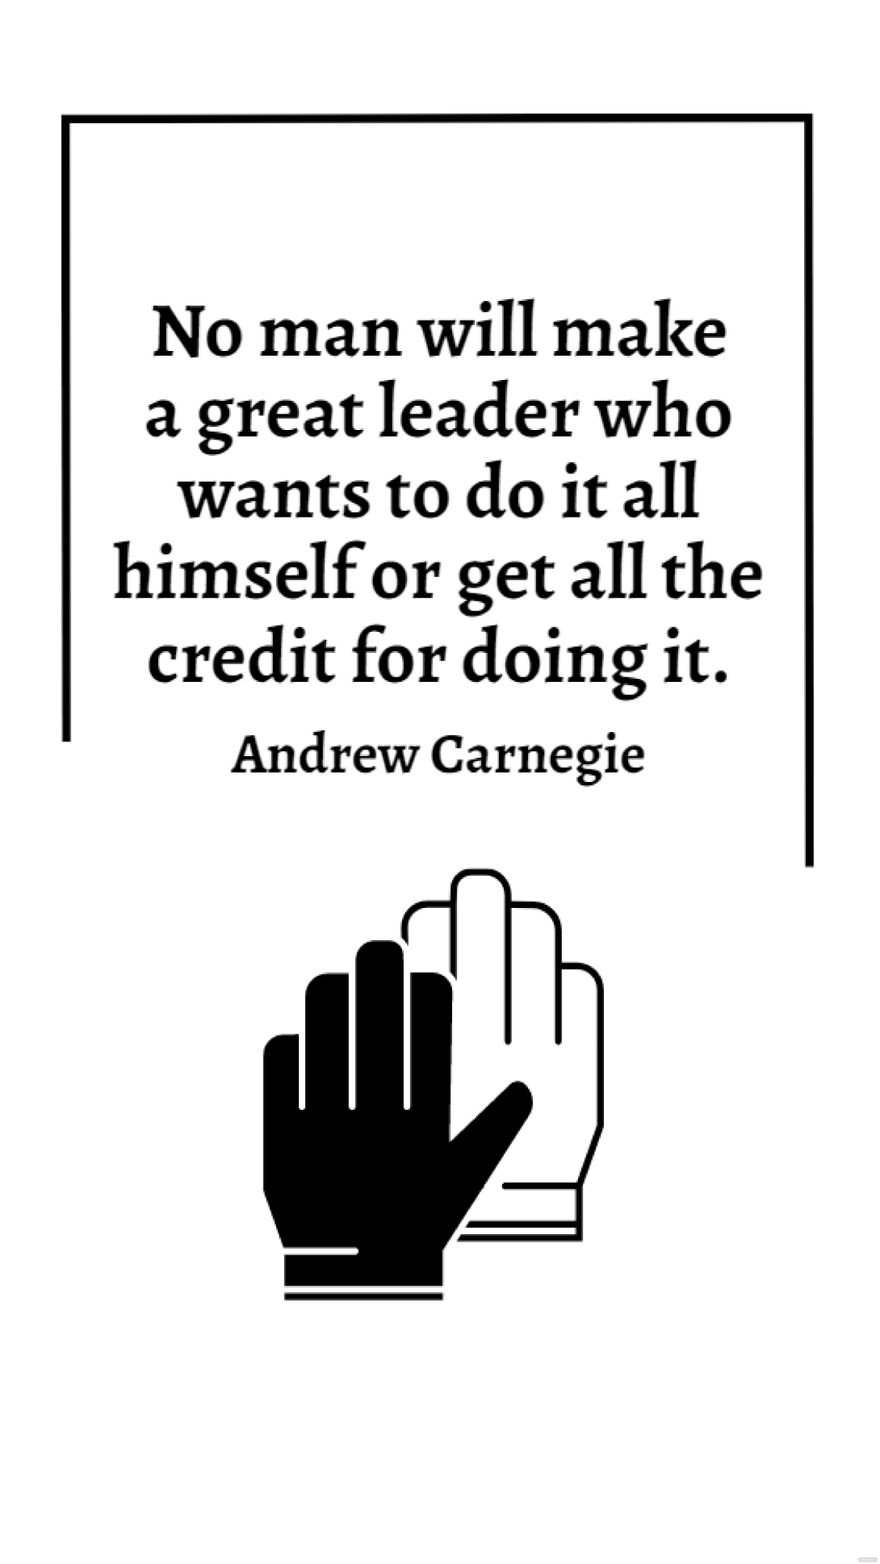 Andrew Carnegie - No man will make a great leader who wants to do it all himself or get all the credit for doing it.